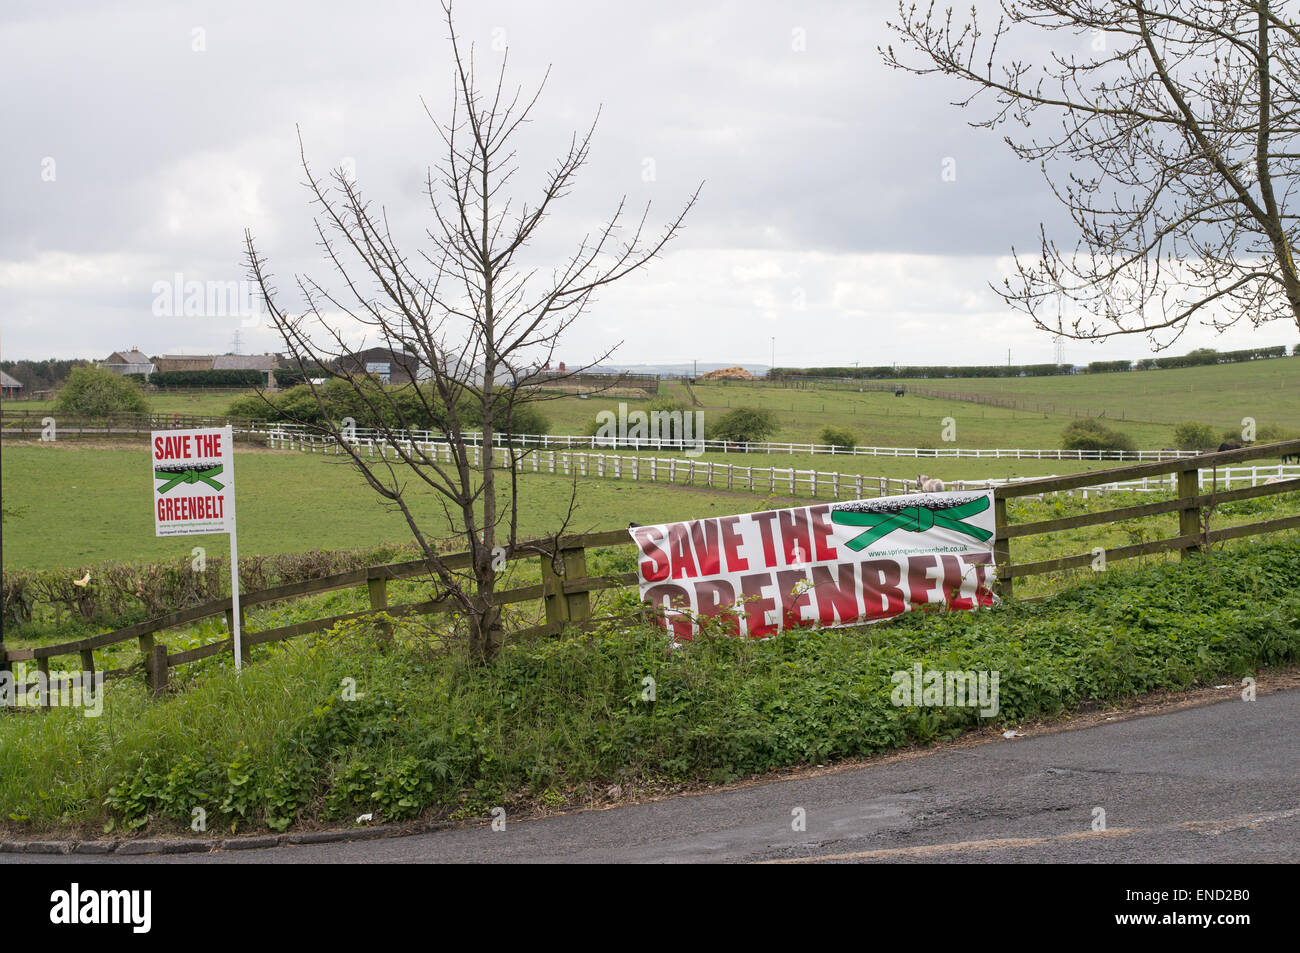 Save the Greenbelt sign, Springwell Village, north east England UK Stock Photo